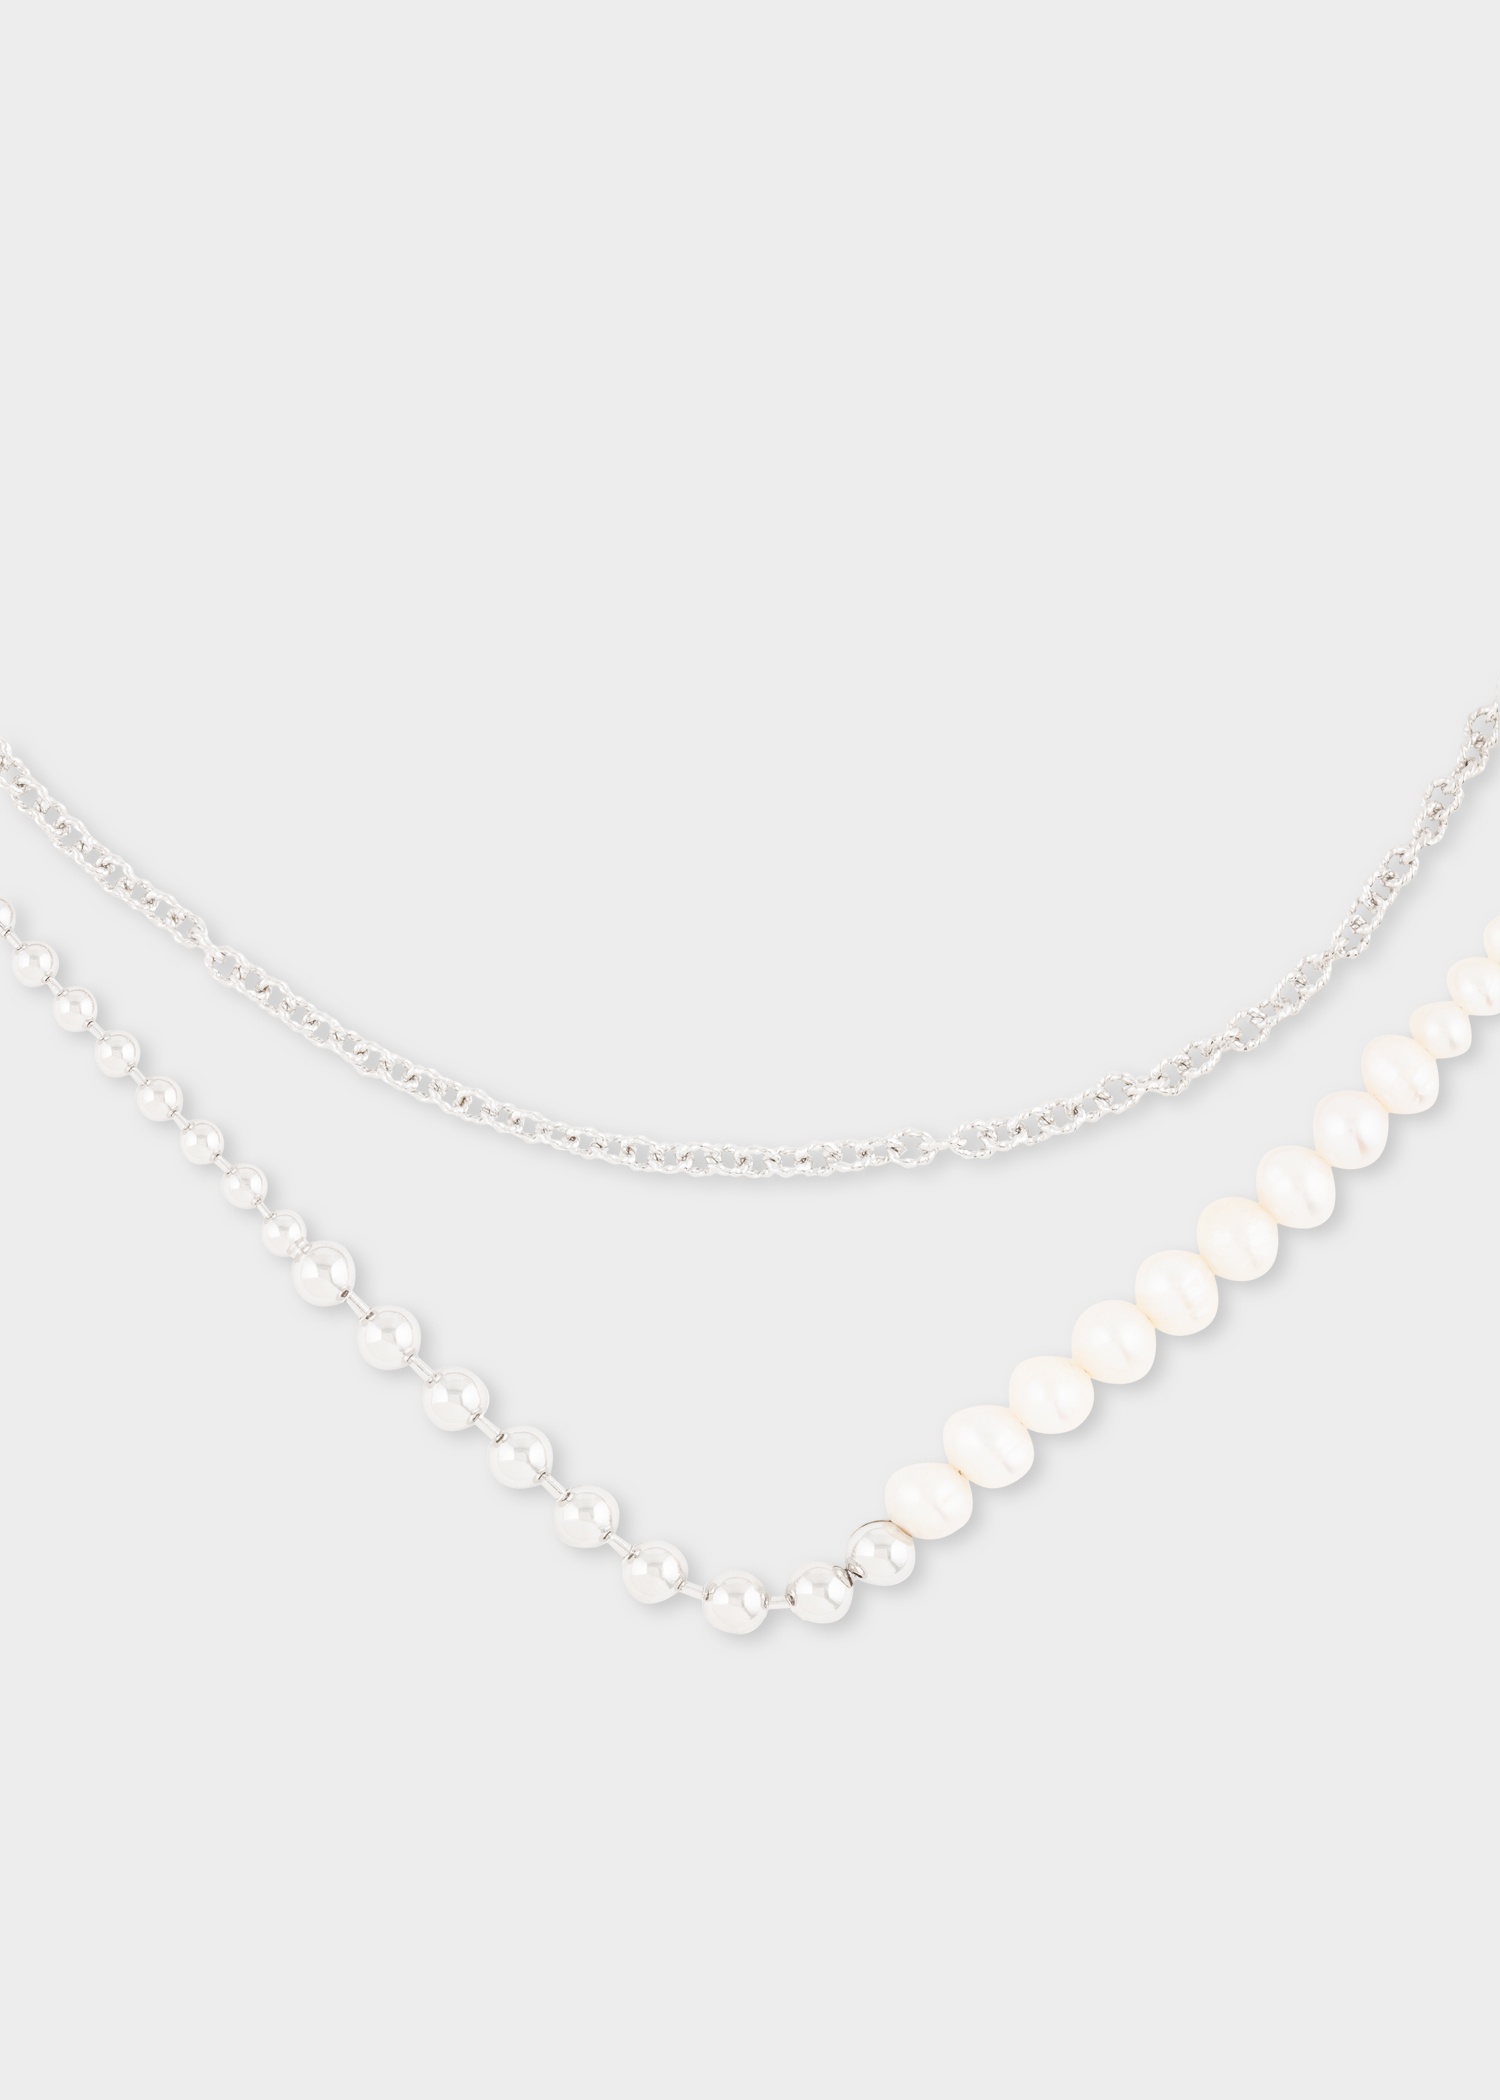 'Forgotten Seas' Pearl & Sterling Silver Double-Chain Necklace by Completedworks - 1